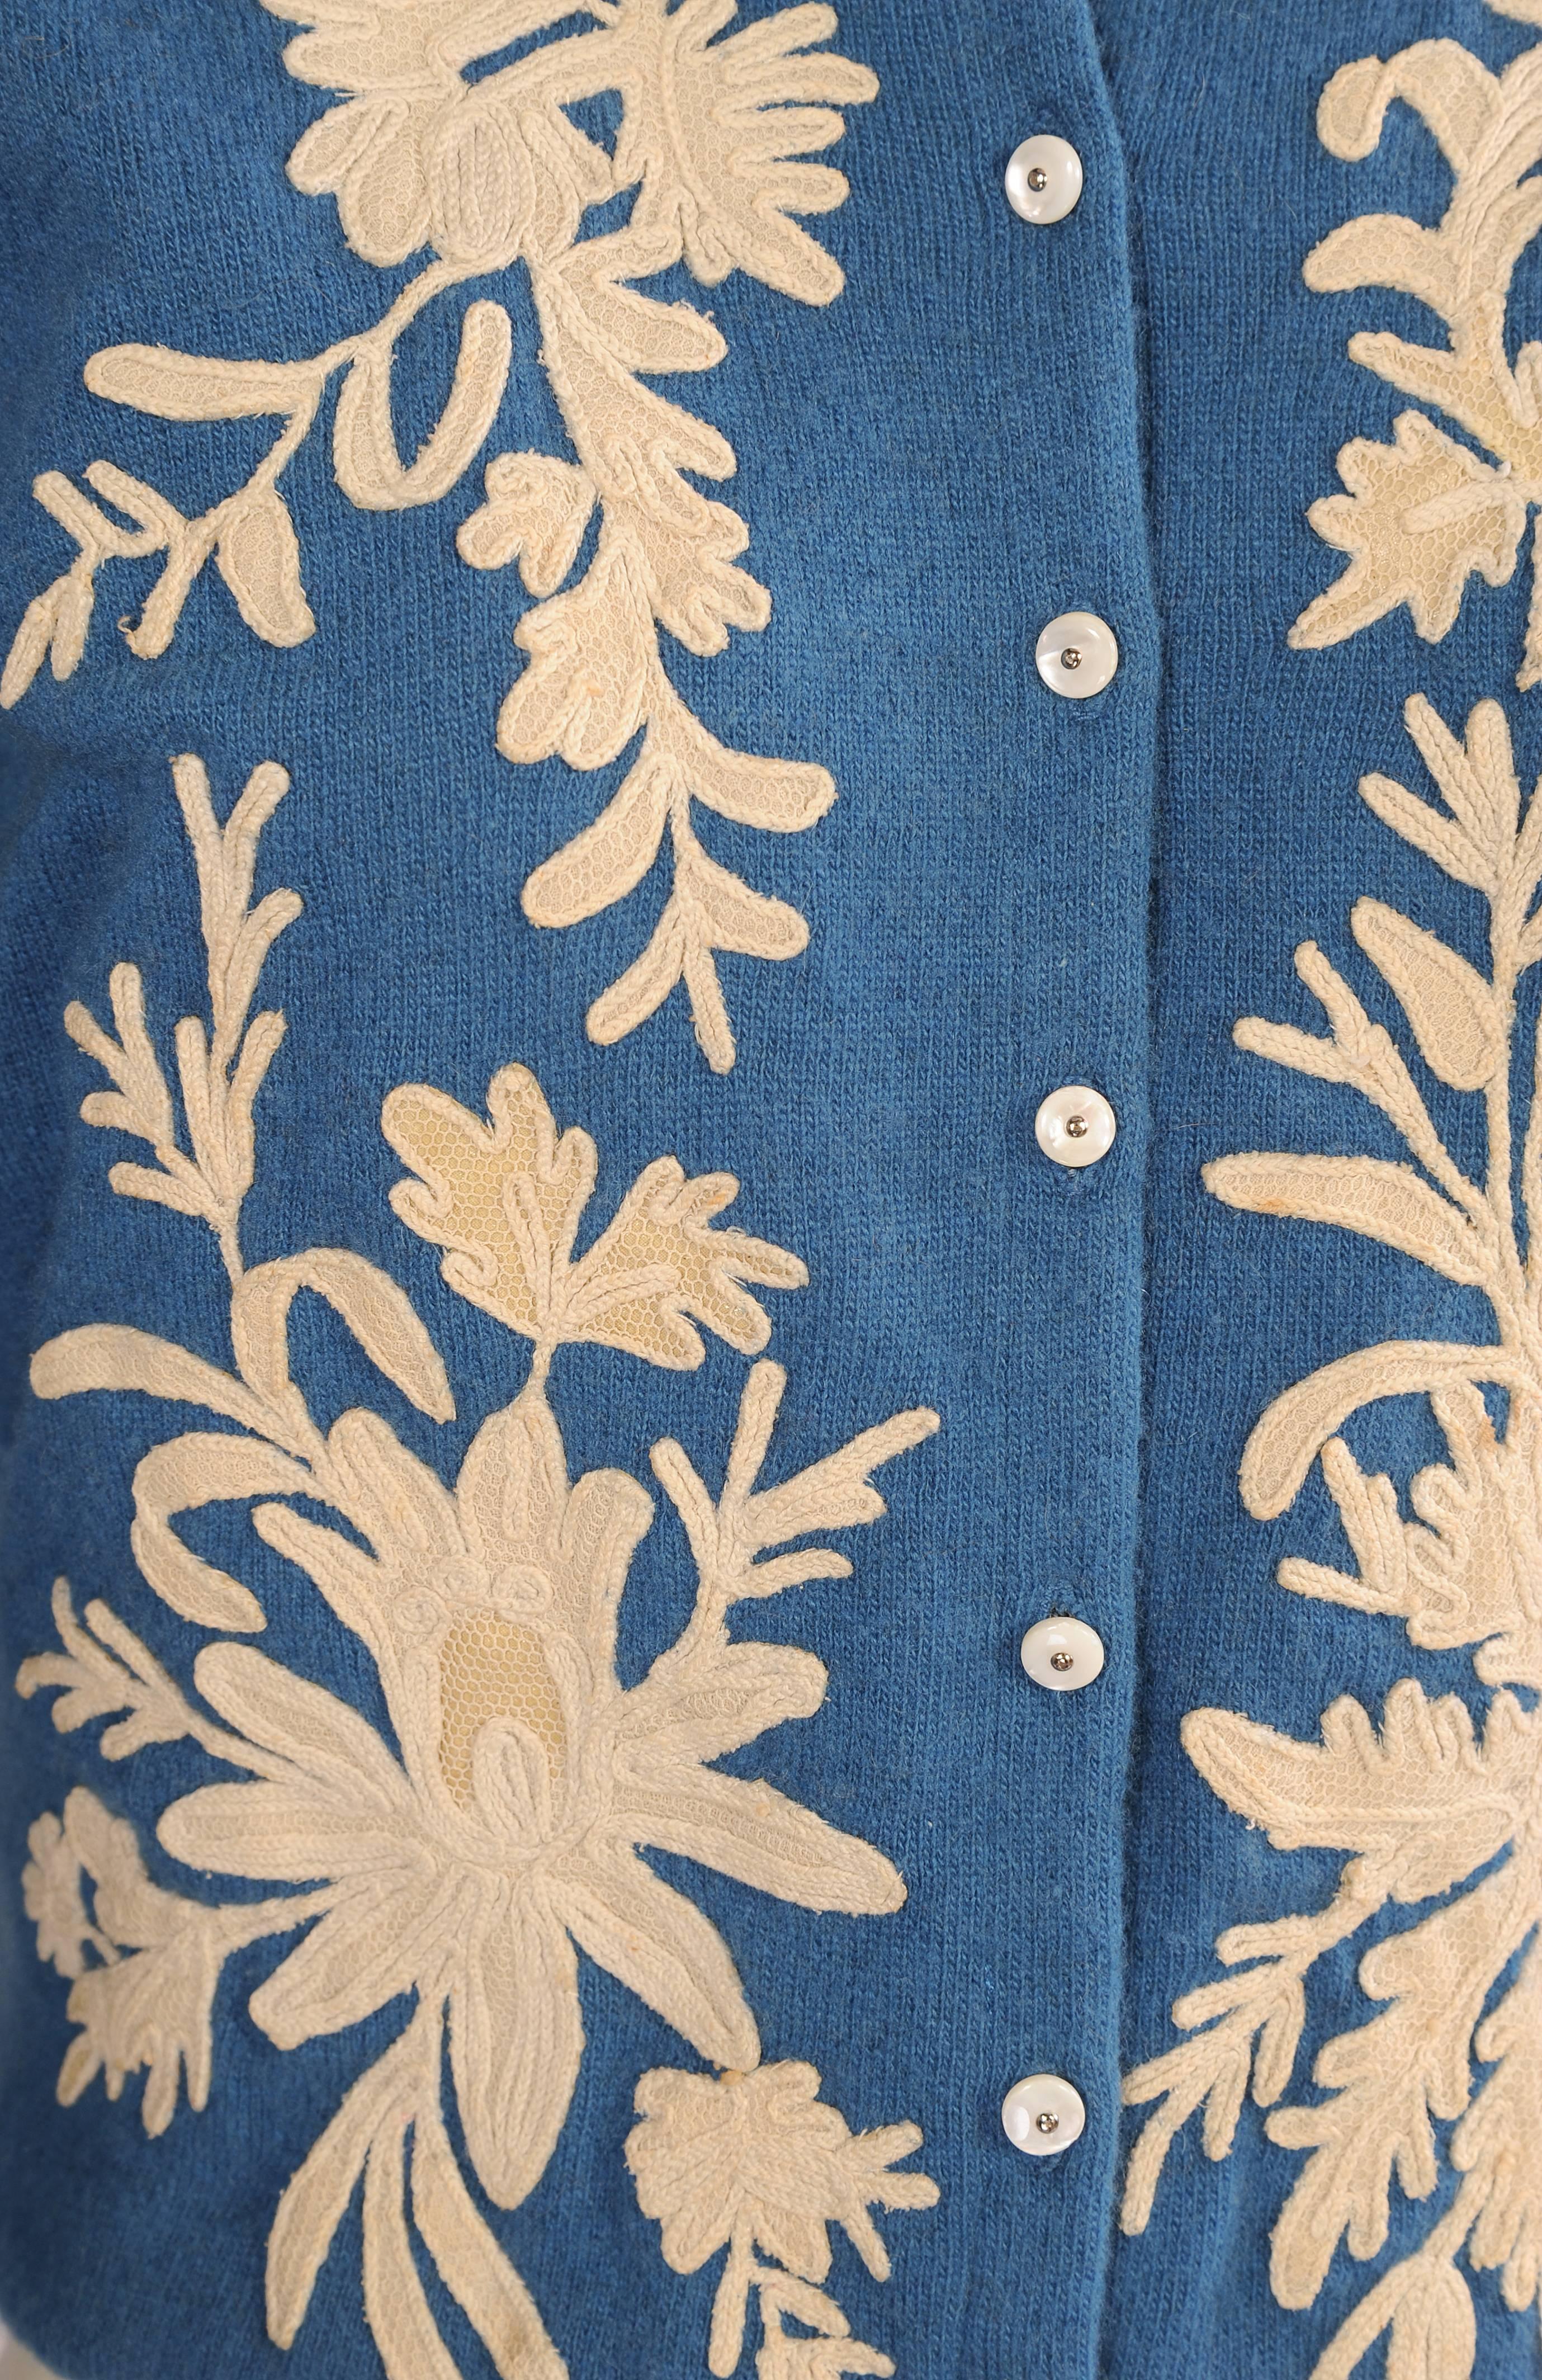 A French blue cashmere sweater is hand appliqued with creamy white antique lace in a floral design. Large lace motifs are hand sewn to either side of the sweater, both sleeves and the entire back. These appliques were carefully cut from antique